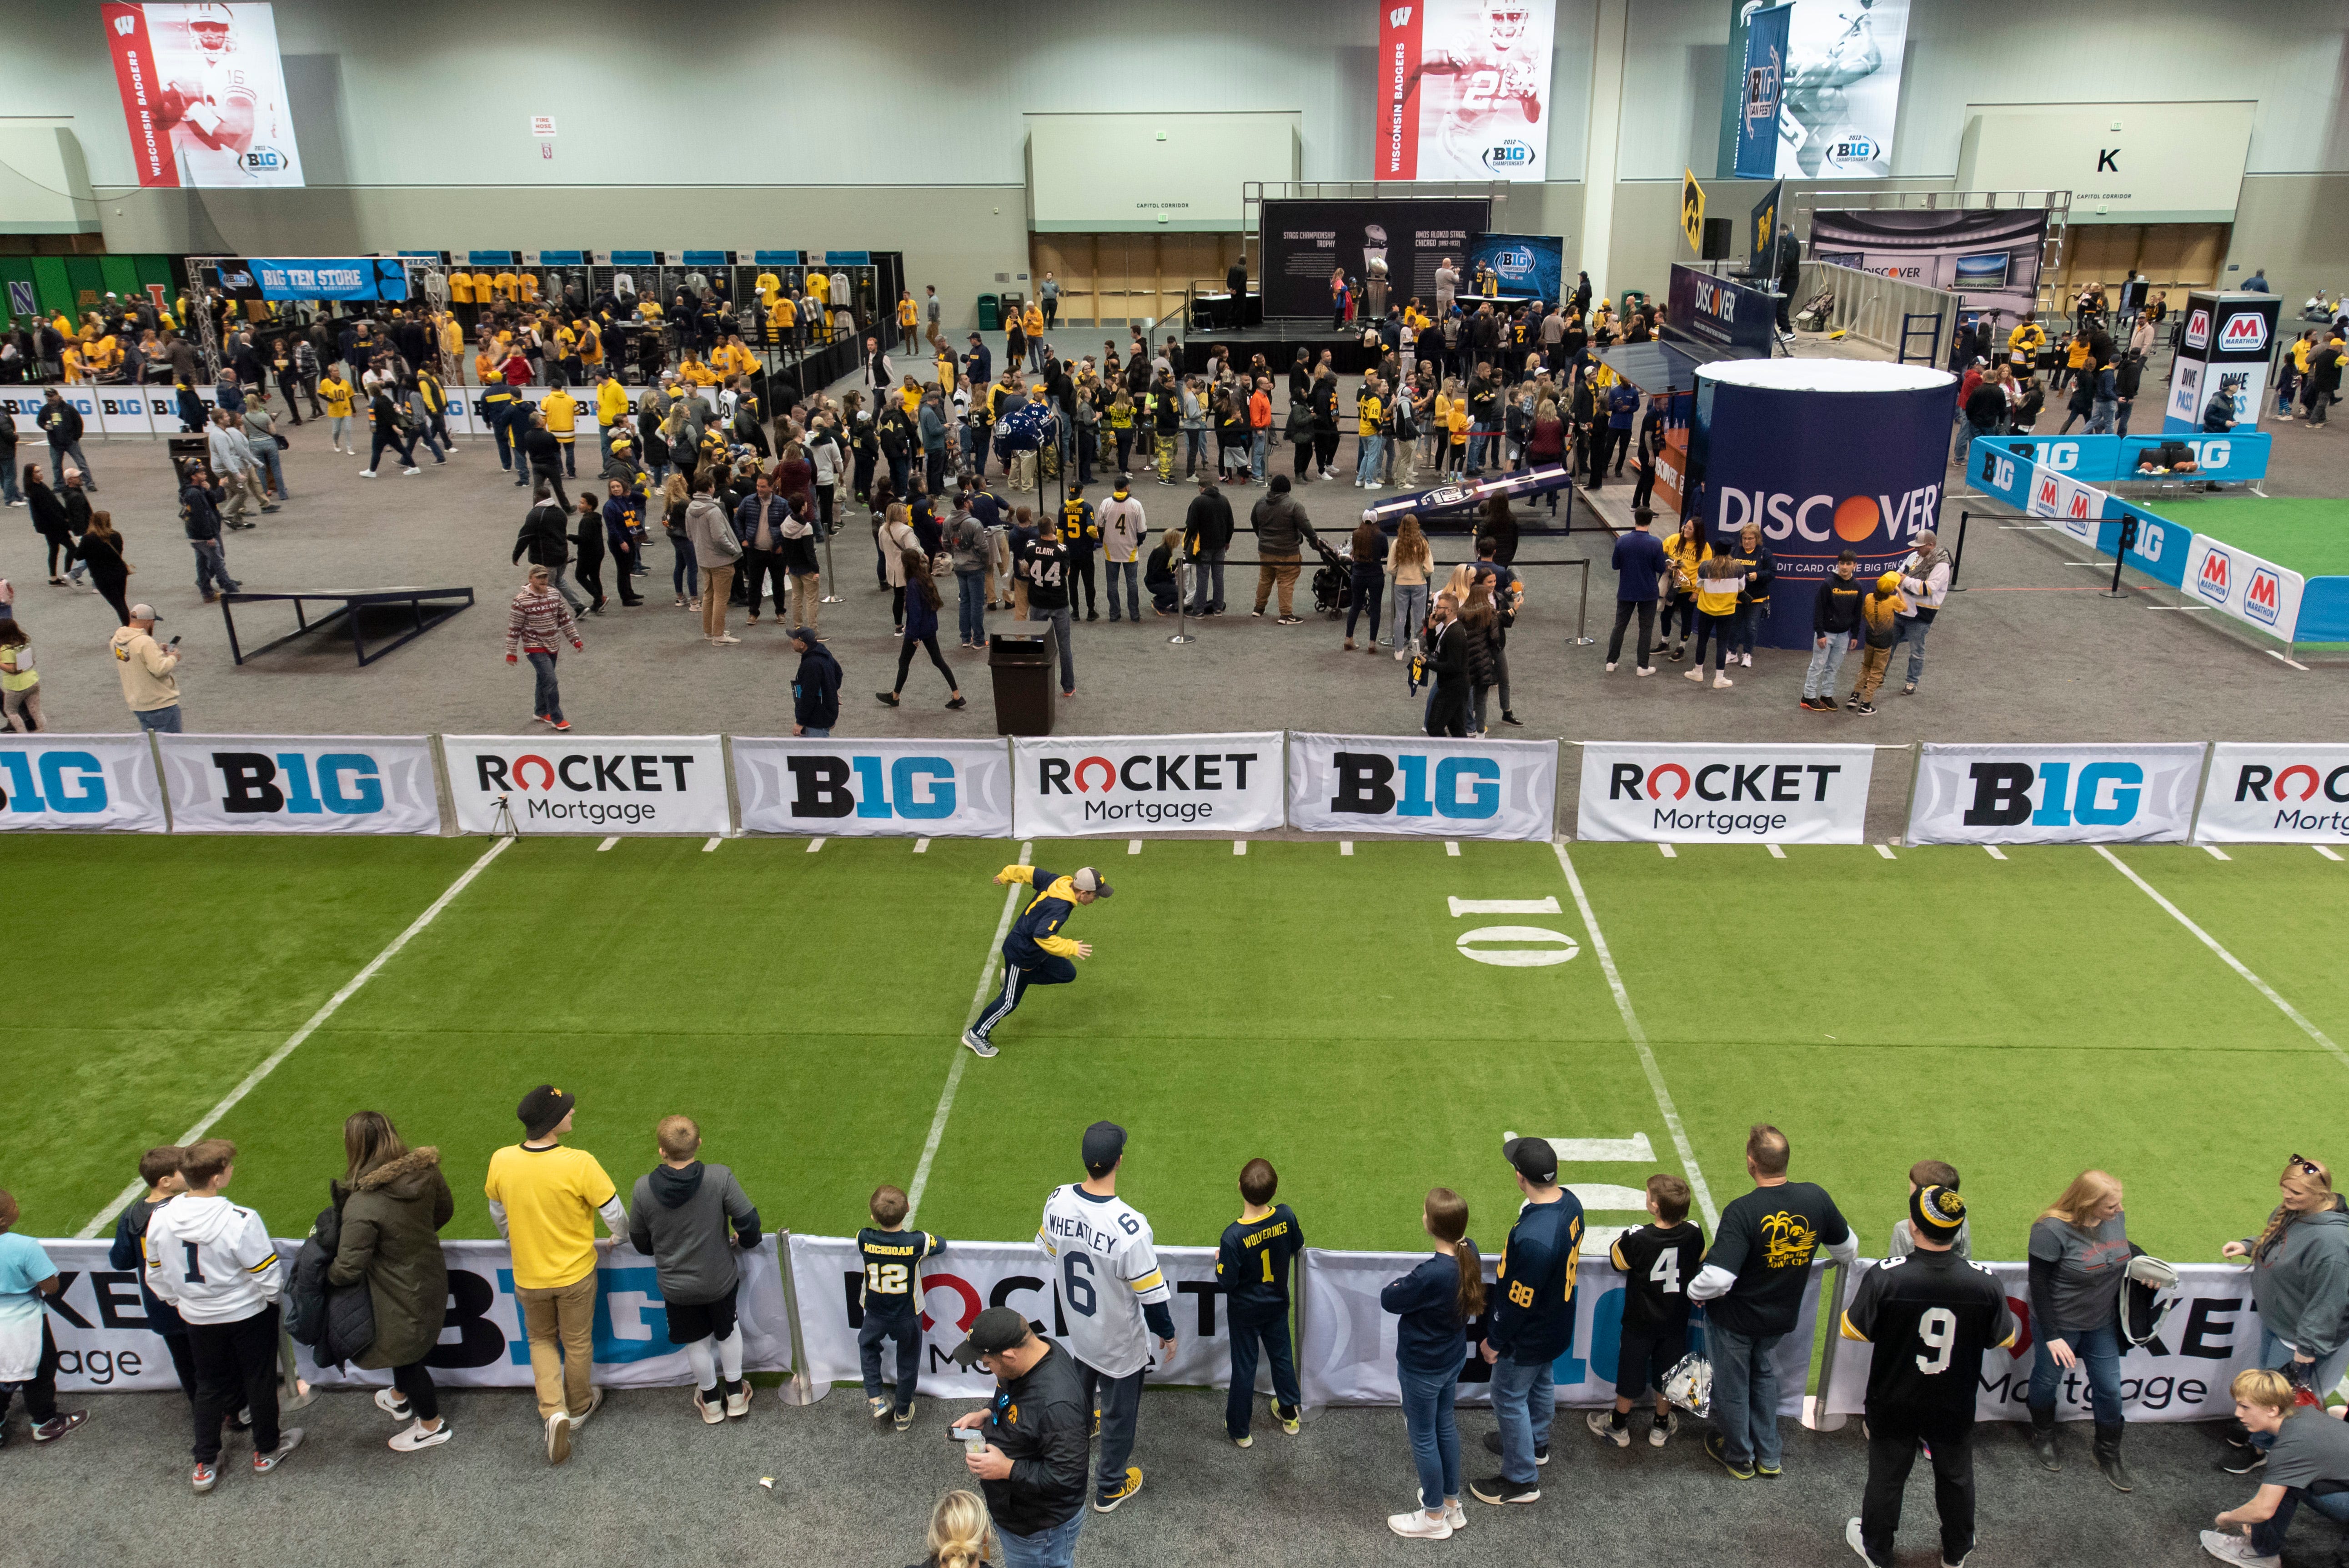 Fans enjoy the Fan Fest at the Indiana Convention Center, before the start of the Big Ten championship game.